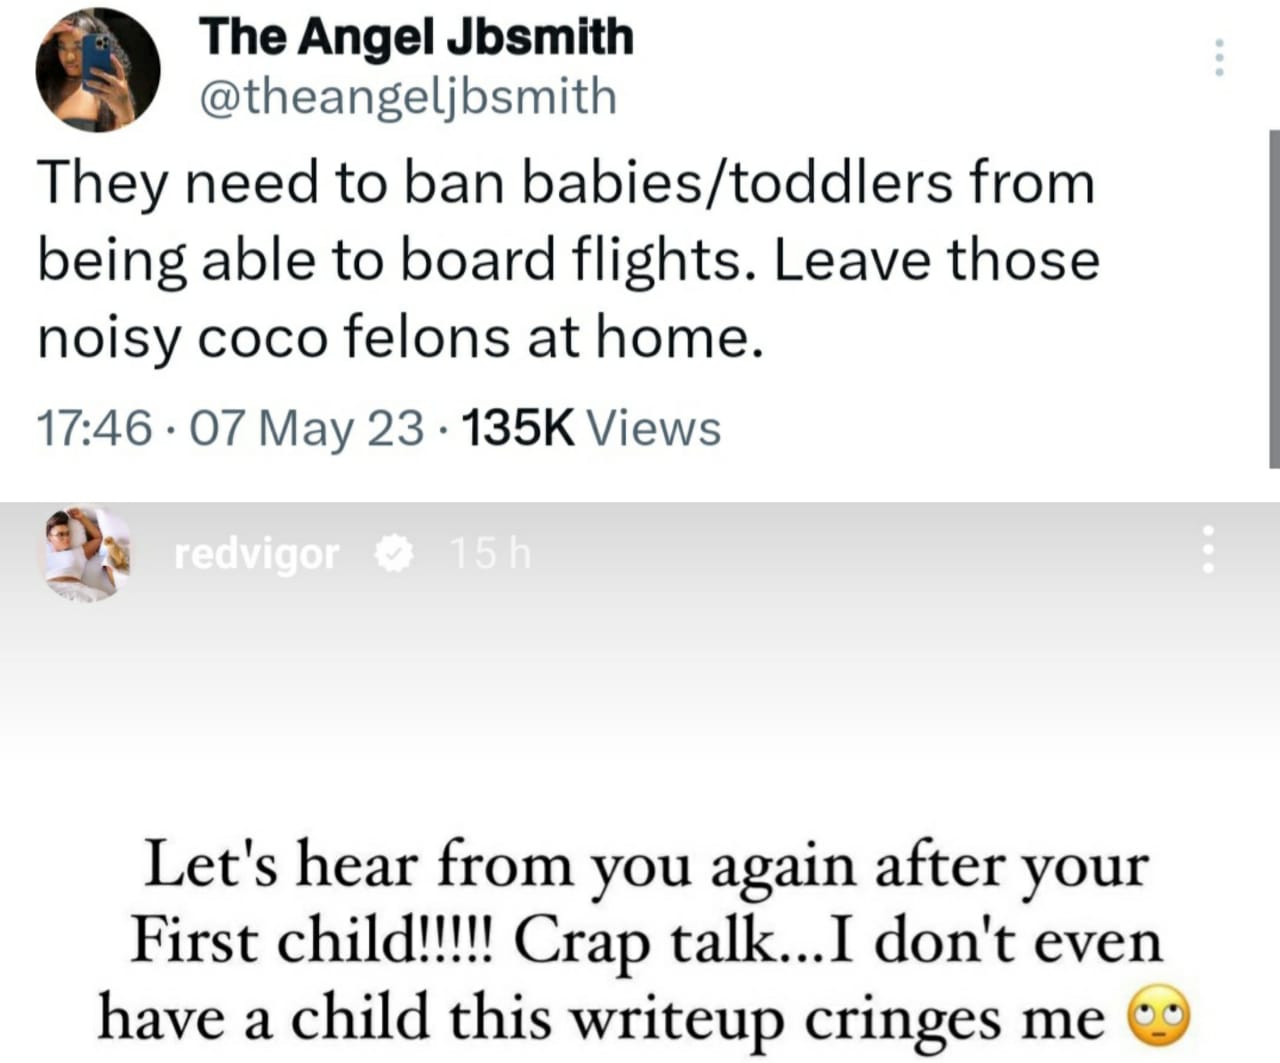 "Crap talk"- Businesswoman Redvigor knocks BBNaija's Angel for asking airlines to ban babies from flying